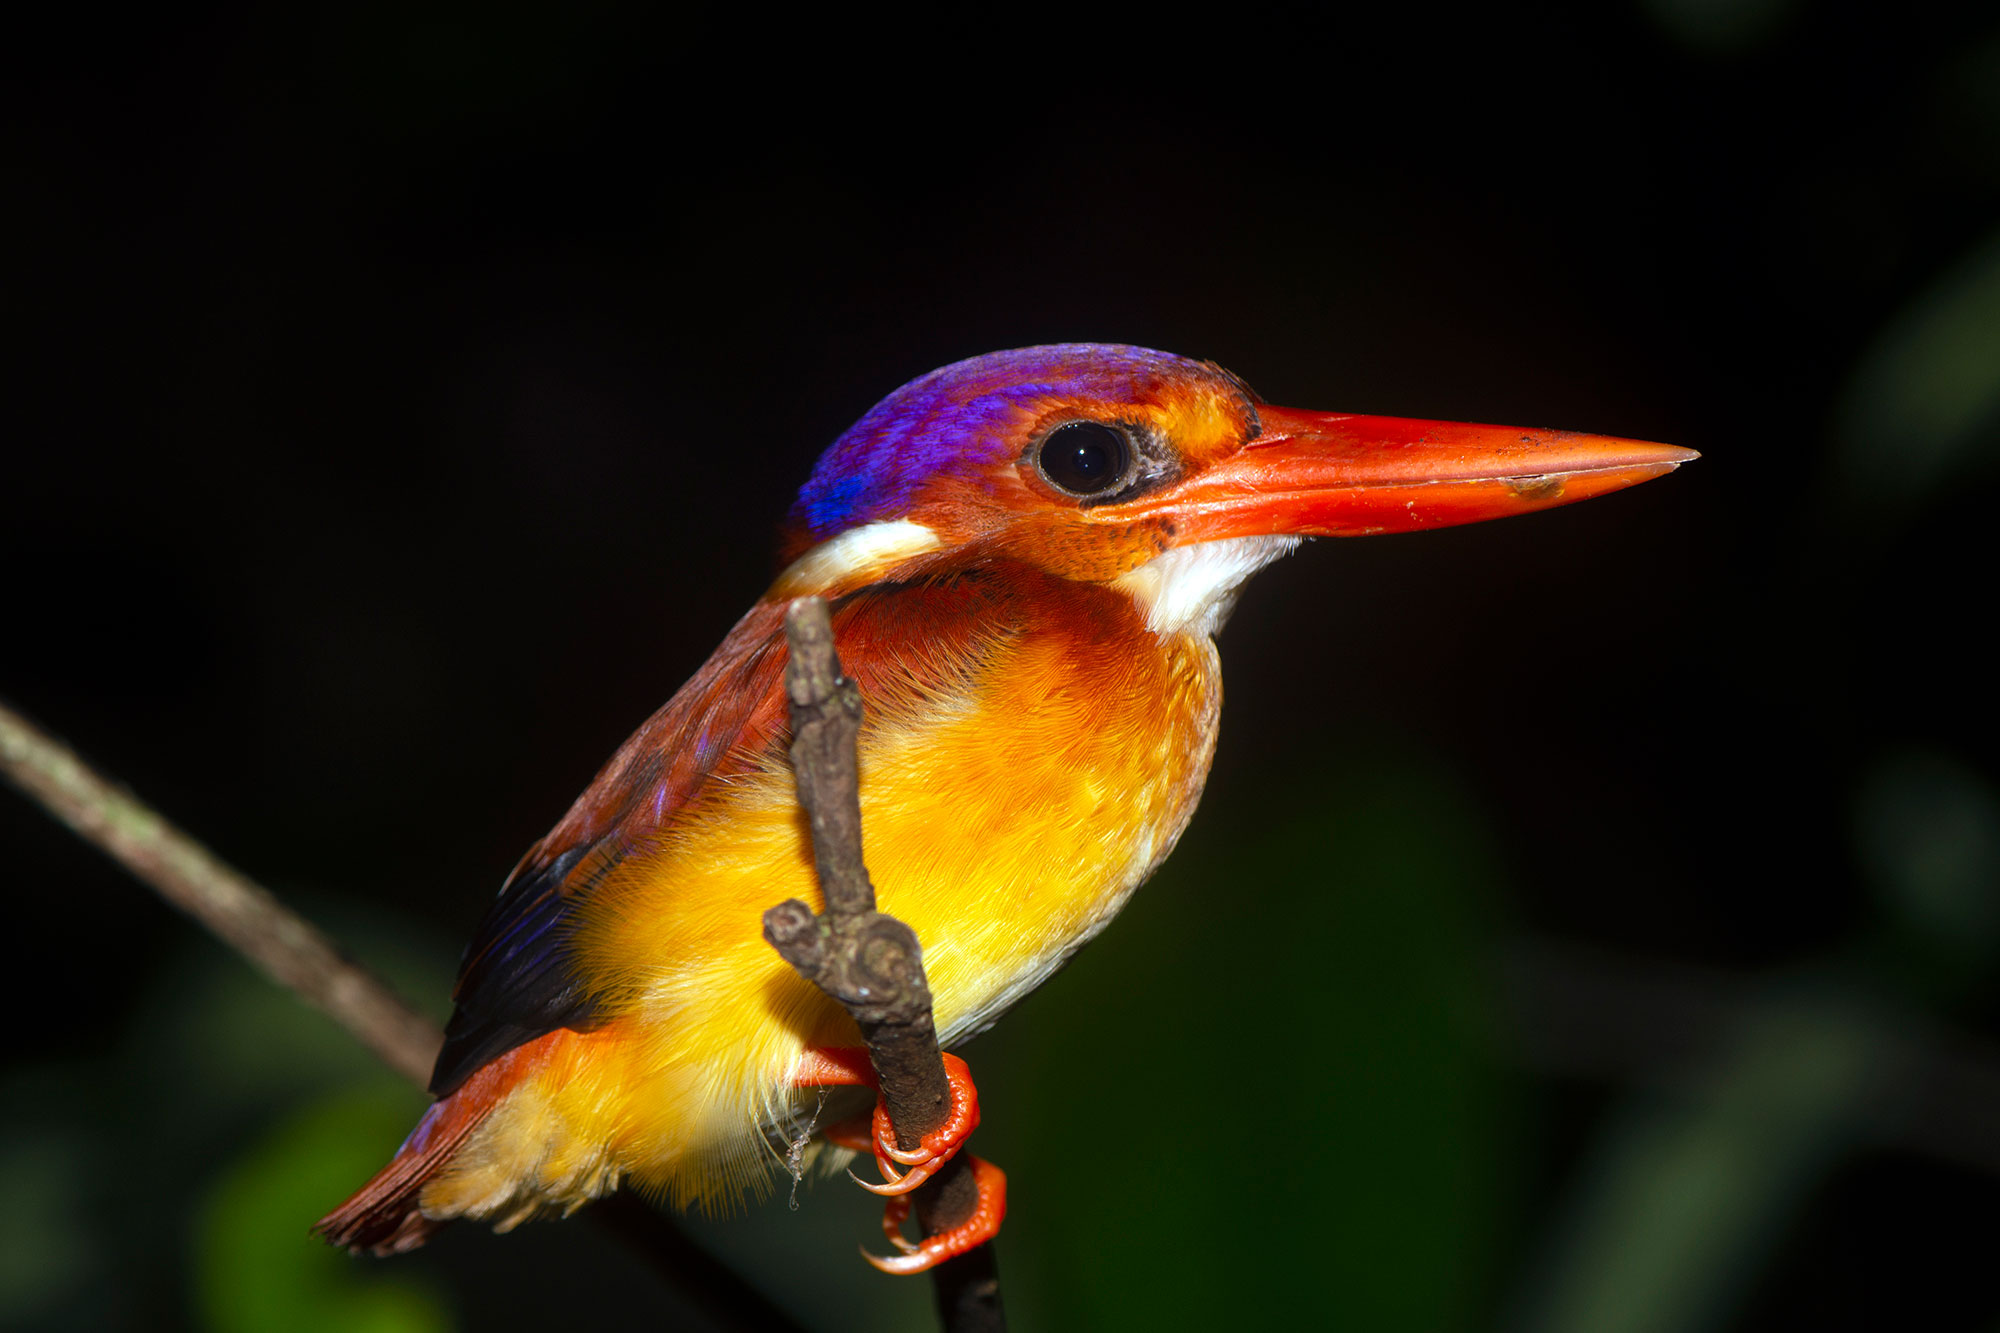 Photograph of a South Philippine dwarf kingfisher. The photo shows a pink, orange, and green bird with a relatively large head, short tail, and large orange beak sitting on the stalk of a palm leaf. The bird has a lizard in its beak.